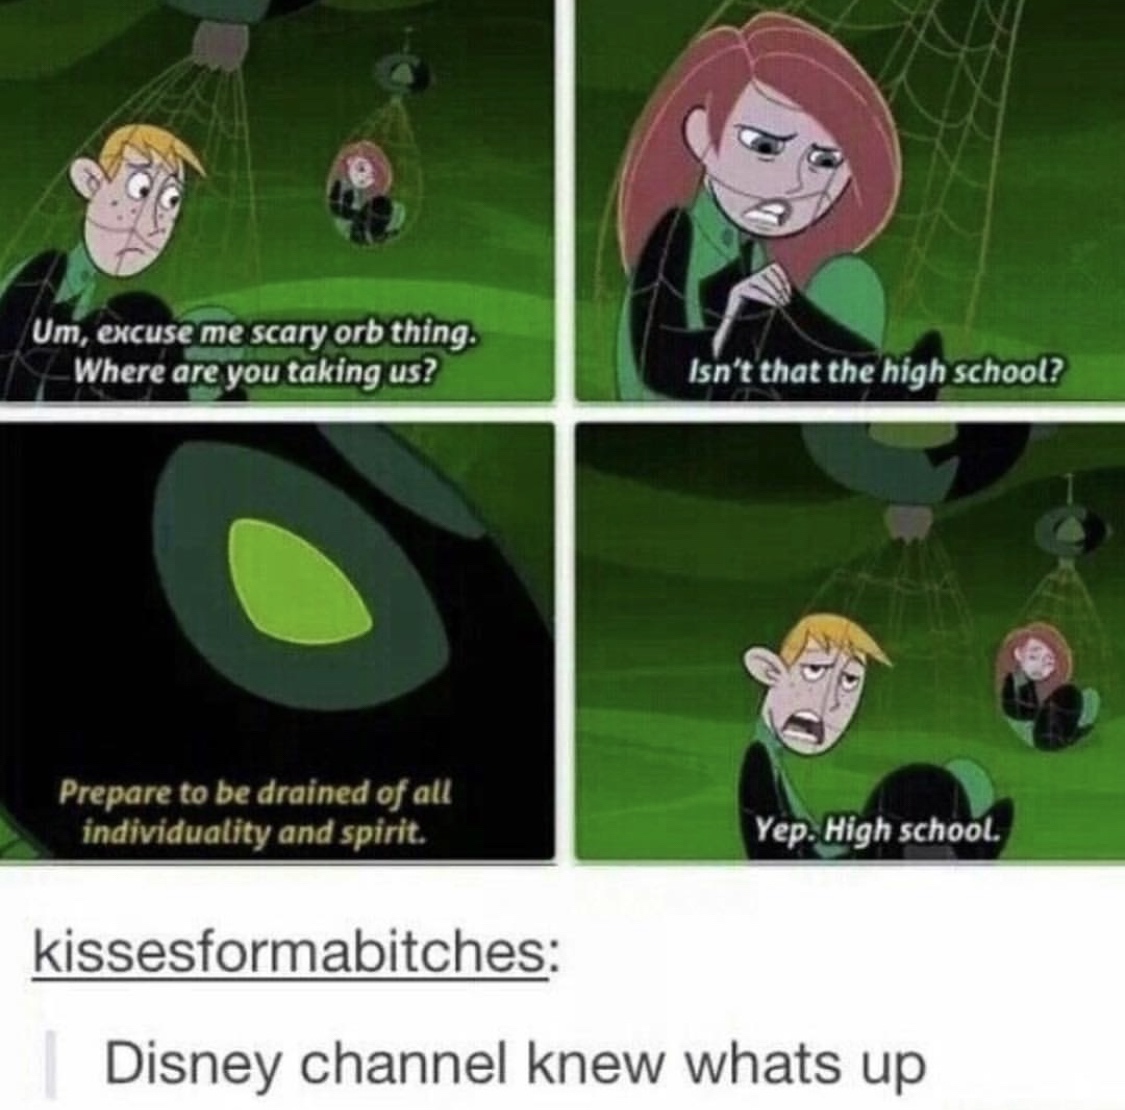 memes - right in the childhood disney - Um, excuse me scary orb thing. Where are you taking us? Isn't that the high school? Prepare to be drained of all individuality and spirit. Yep. High school. kissesformabitches Disney channel knew whats up